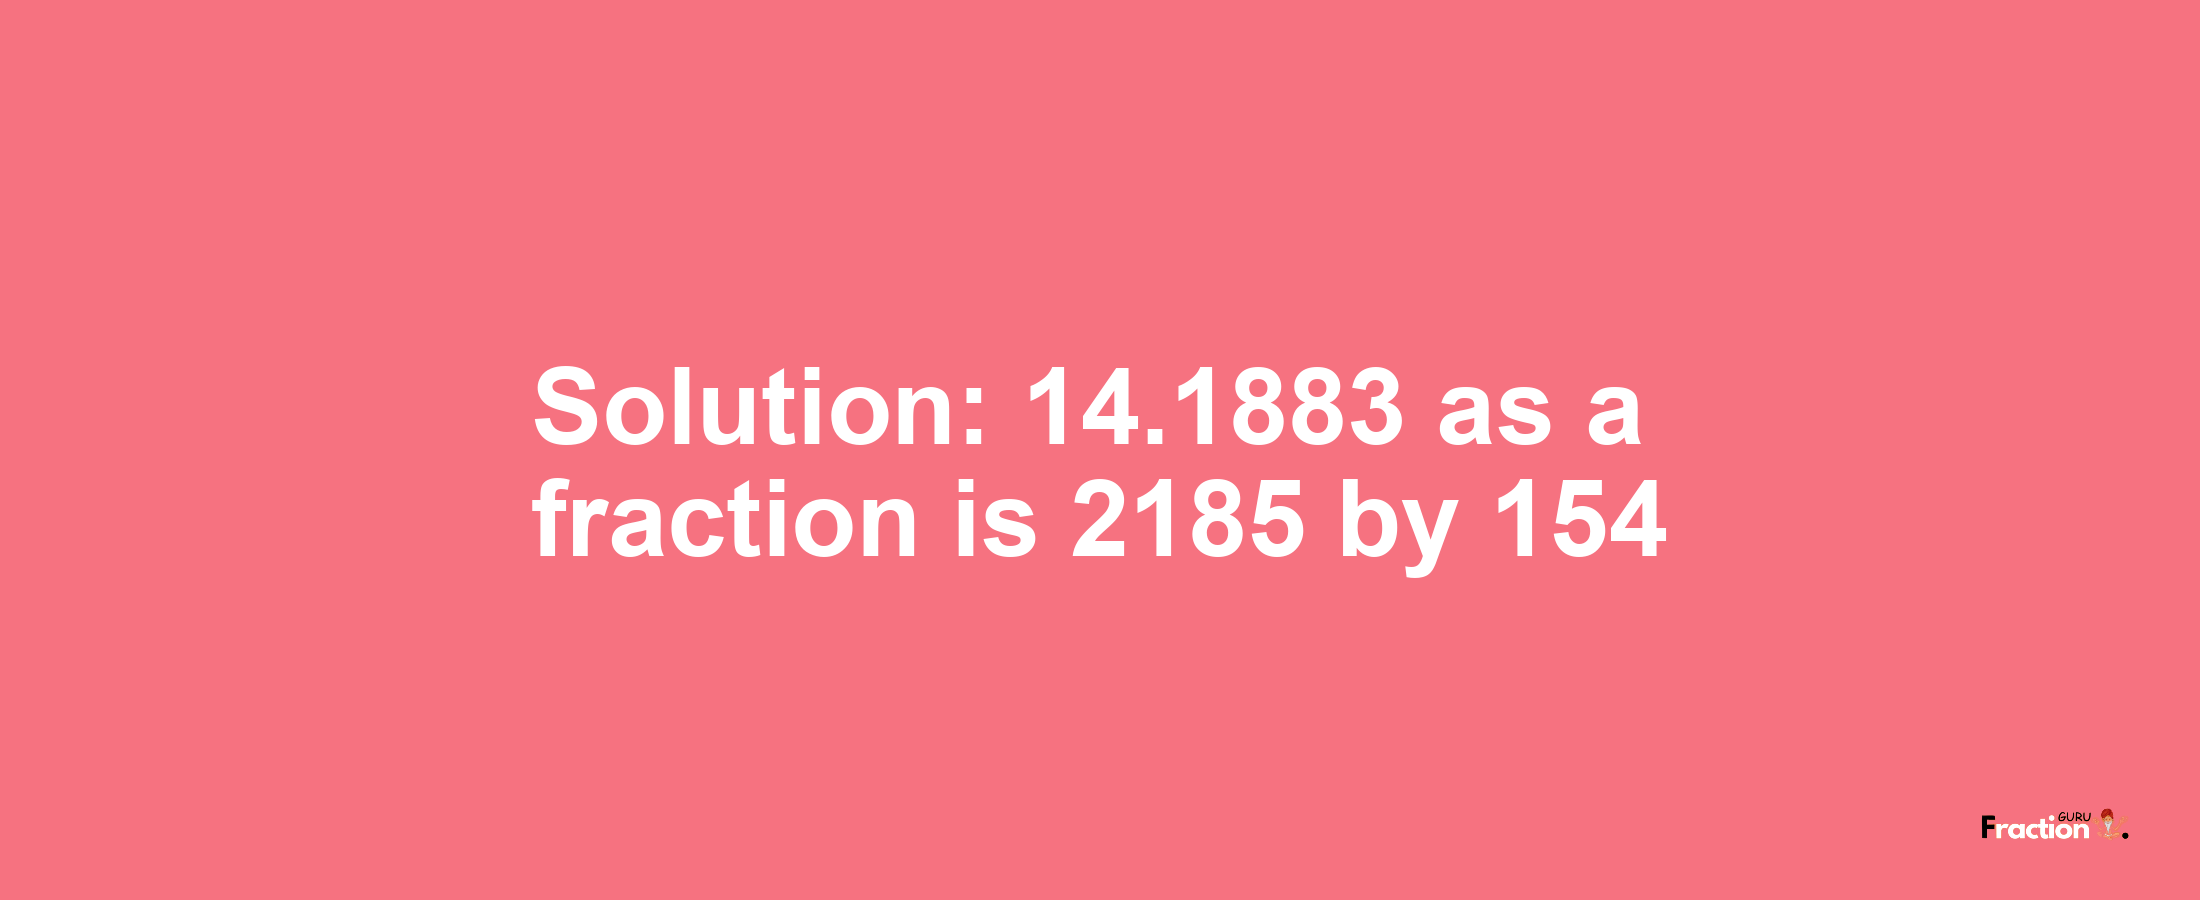 Solution:14.1883 as a fraction is 2185/154